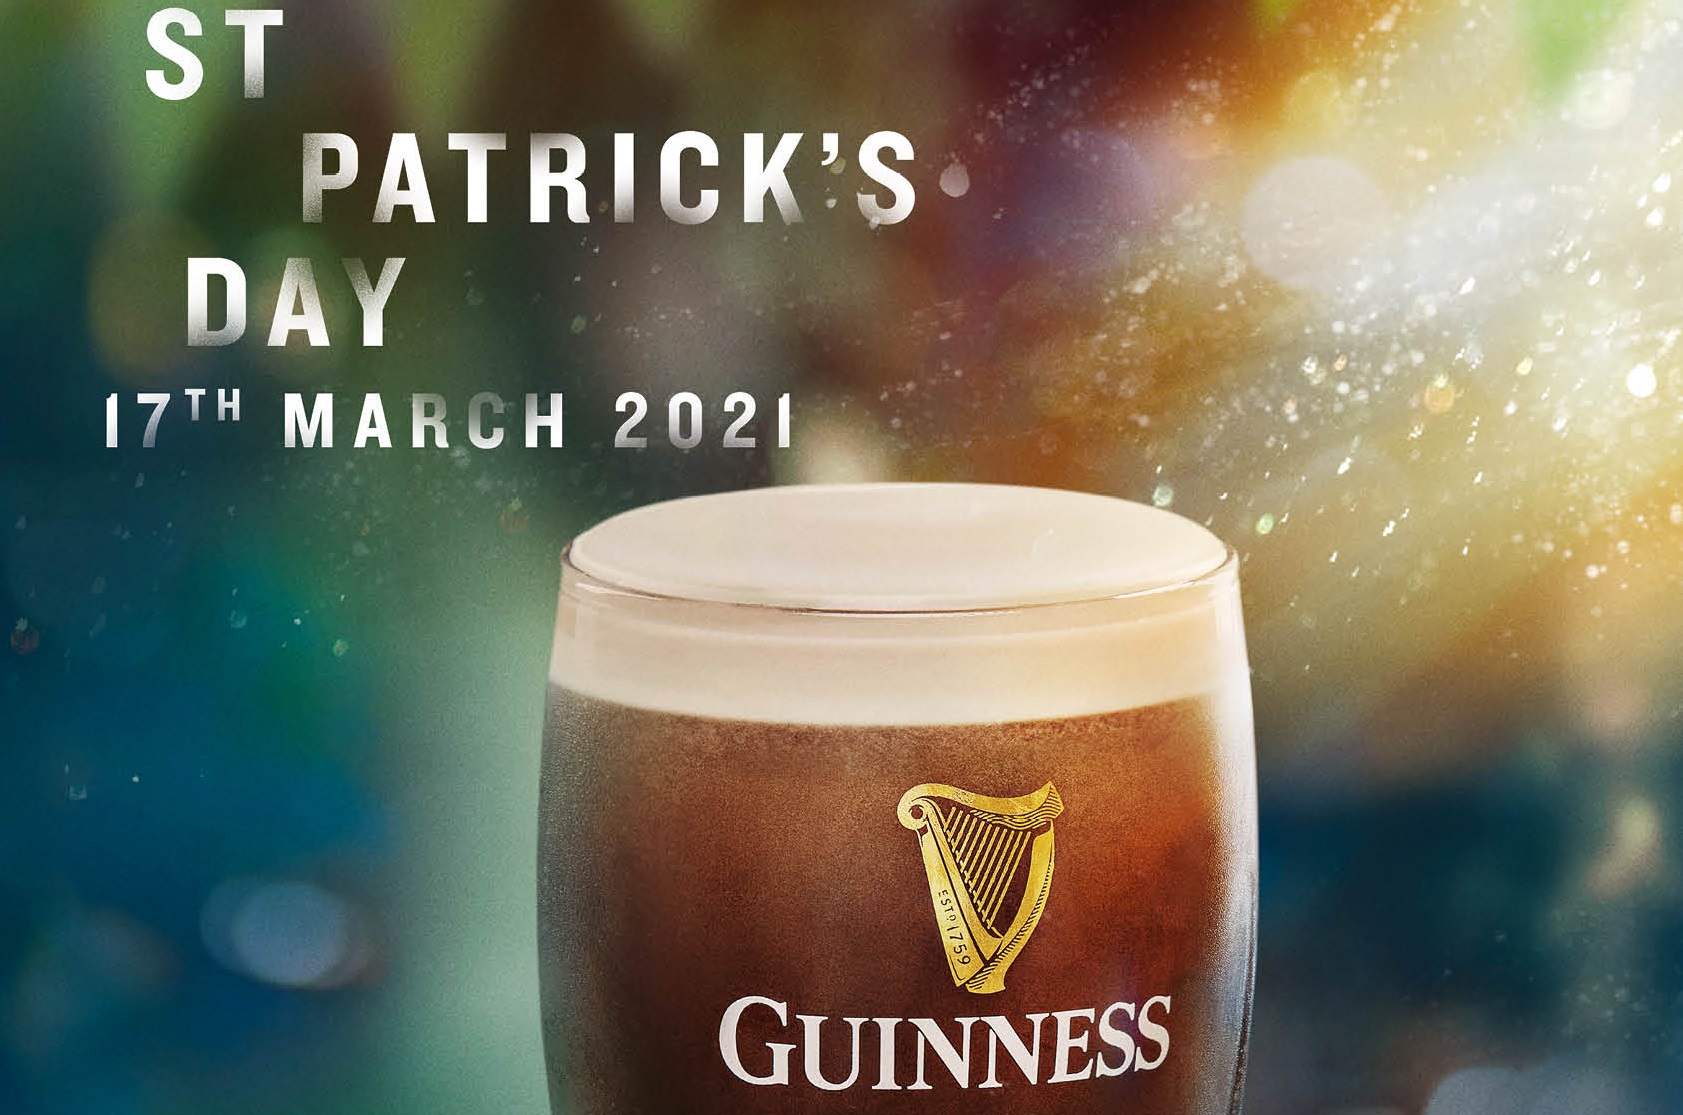 Guinness inspired consumers around the world to celebrate the authentic